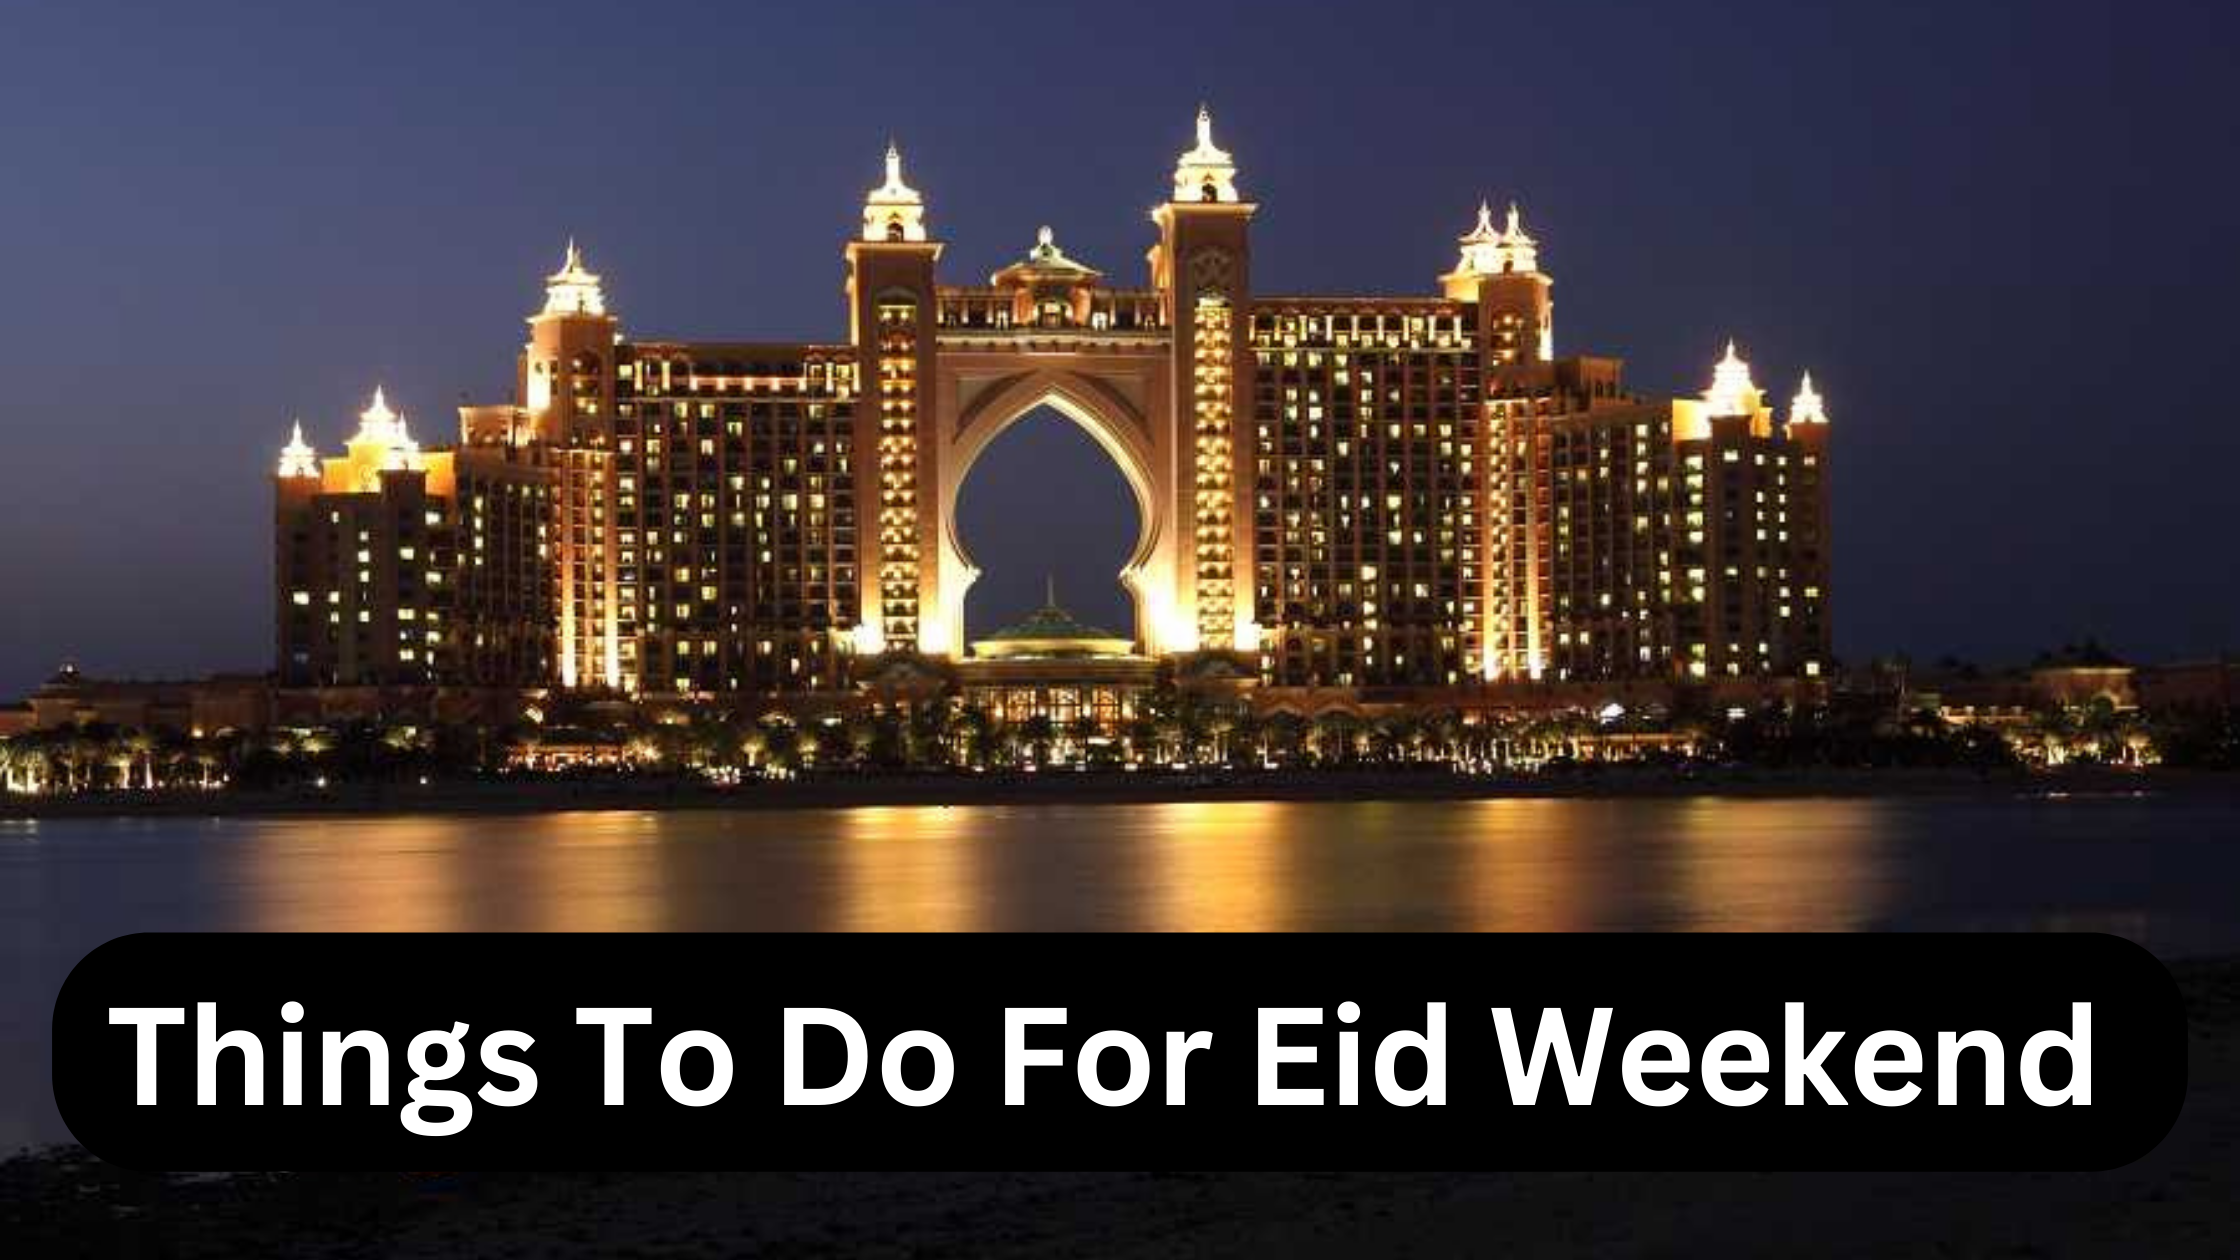 Things to do for Eid weekend in Dubai